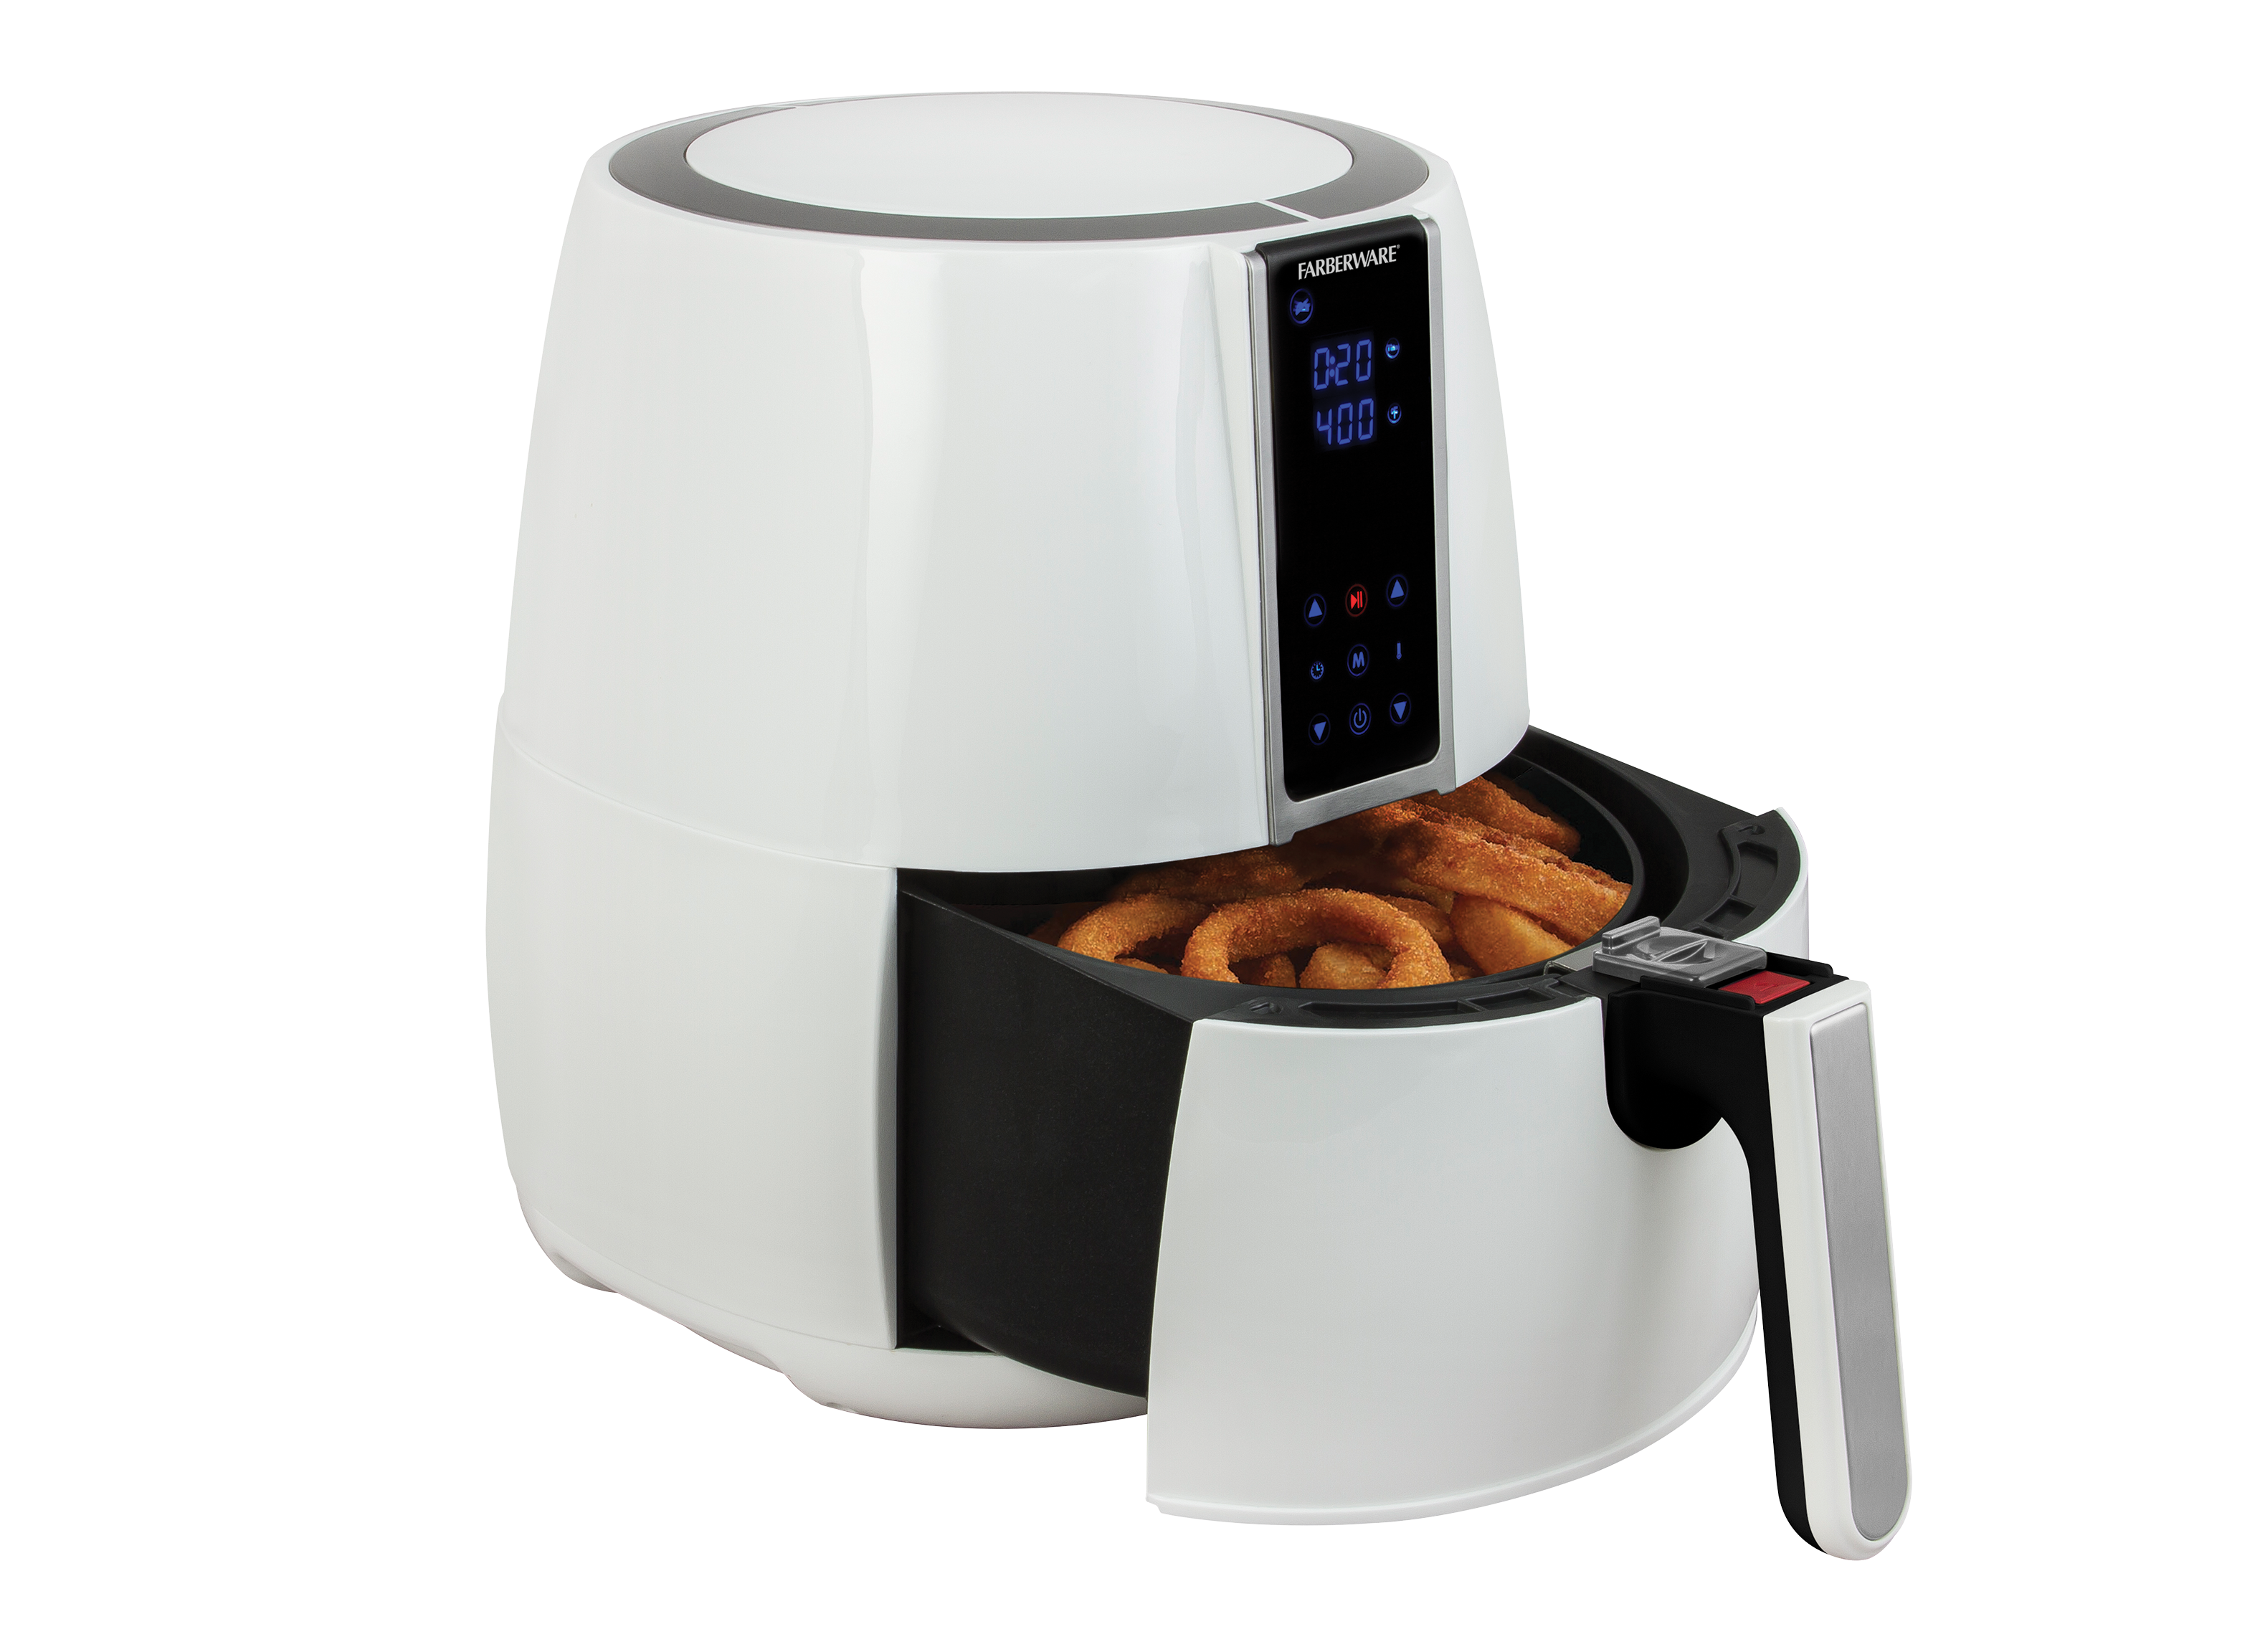 https://crdms.images.consumerreports.org/prod/products/cr/models/399756-air-fryers-farberware-digital-fbw-ft-43479-w-10008400.png